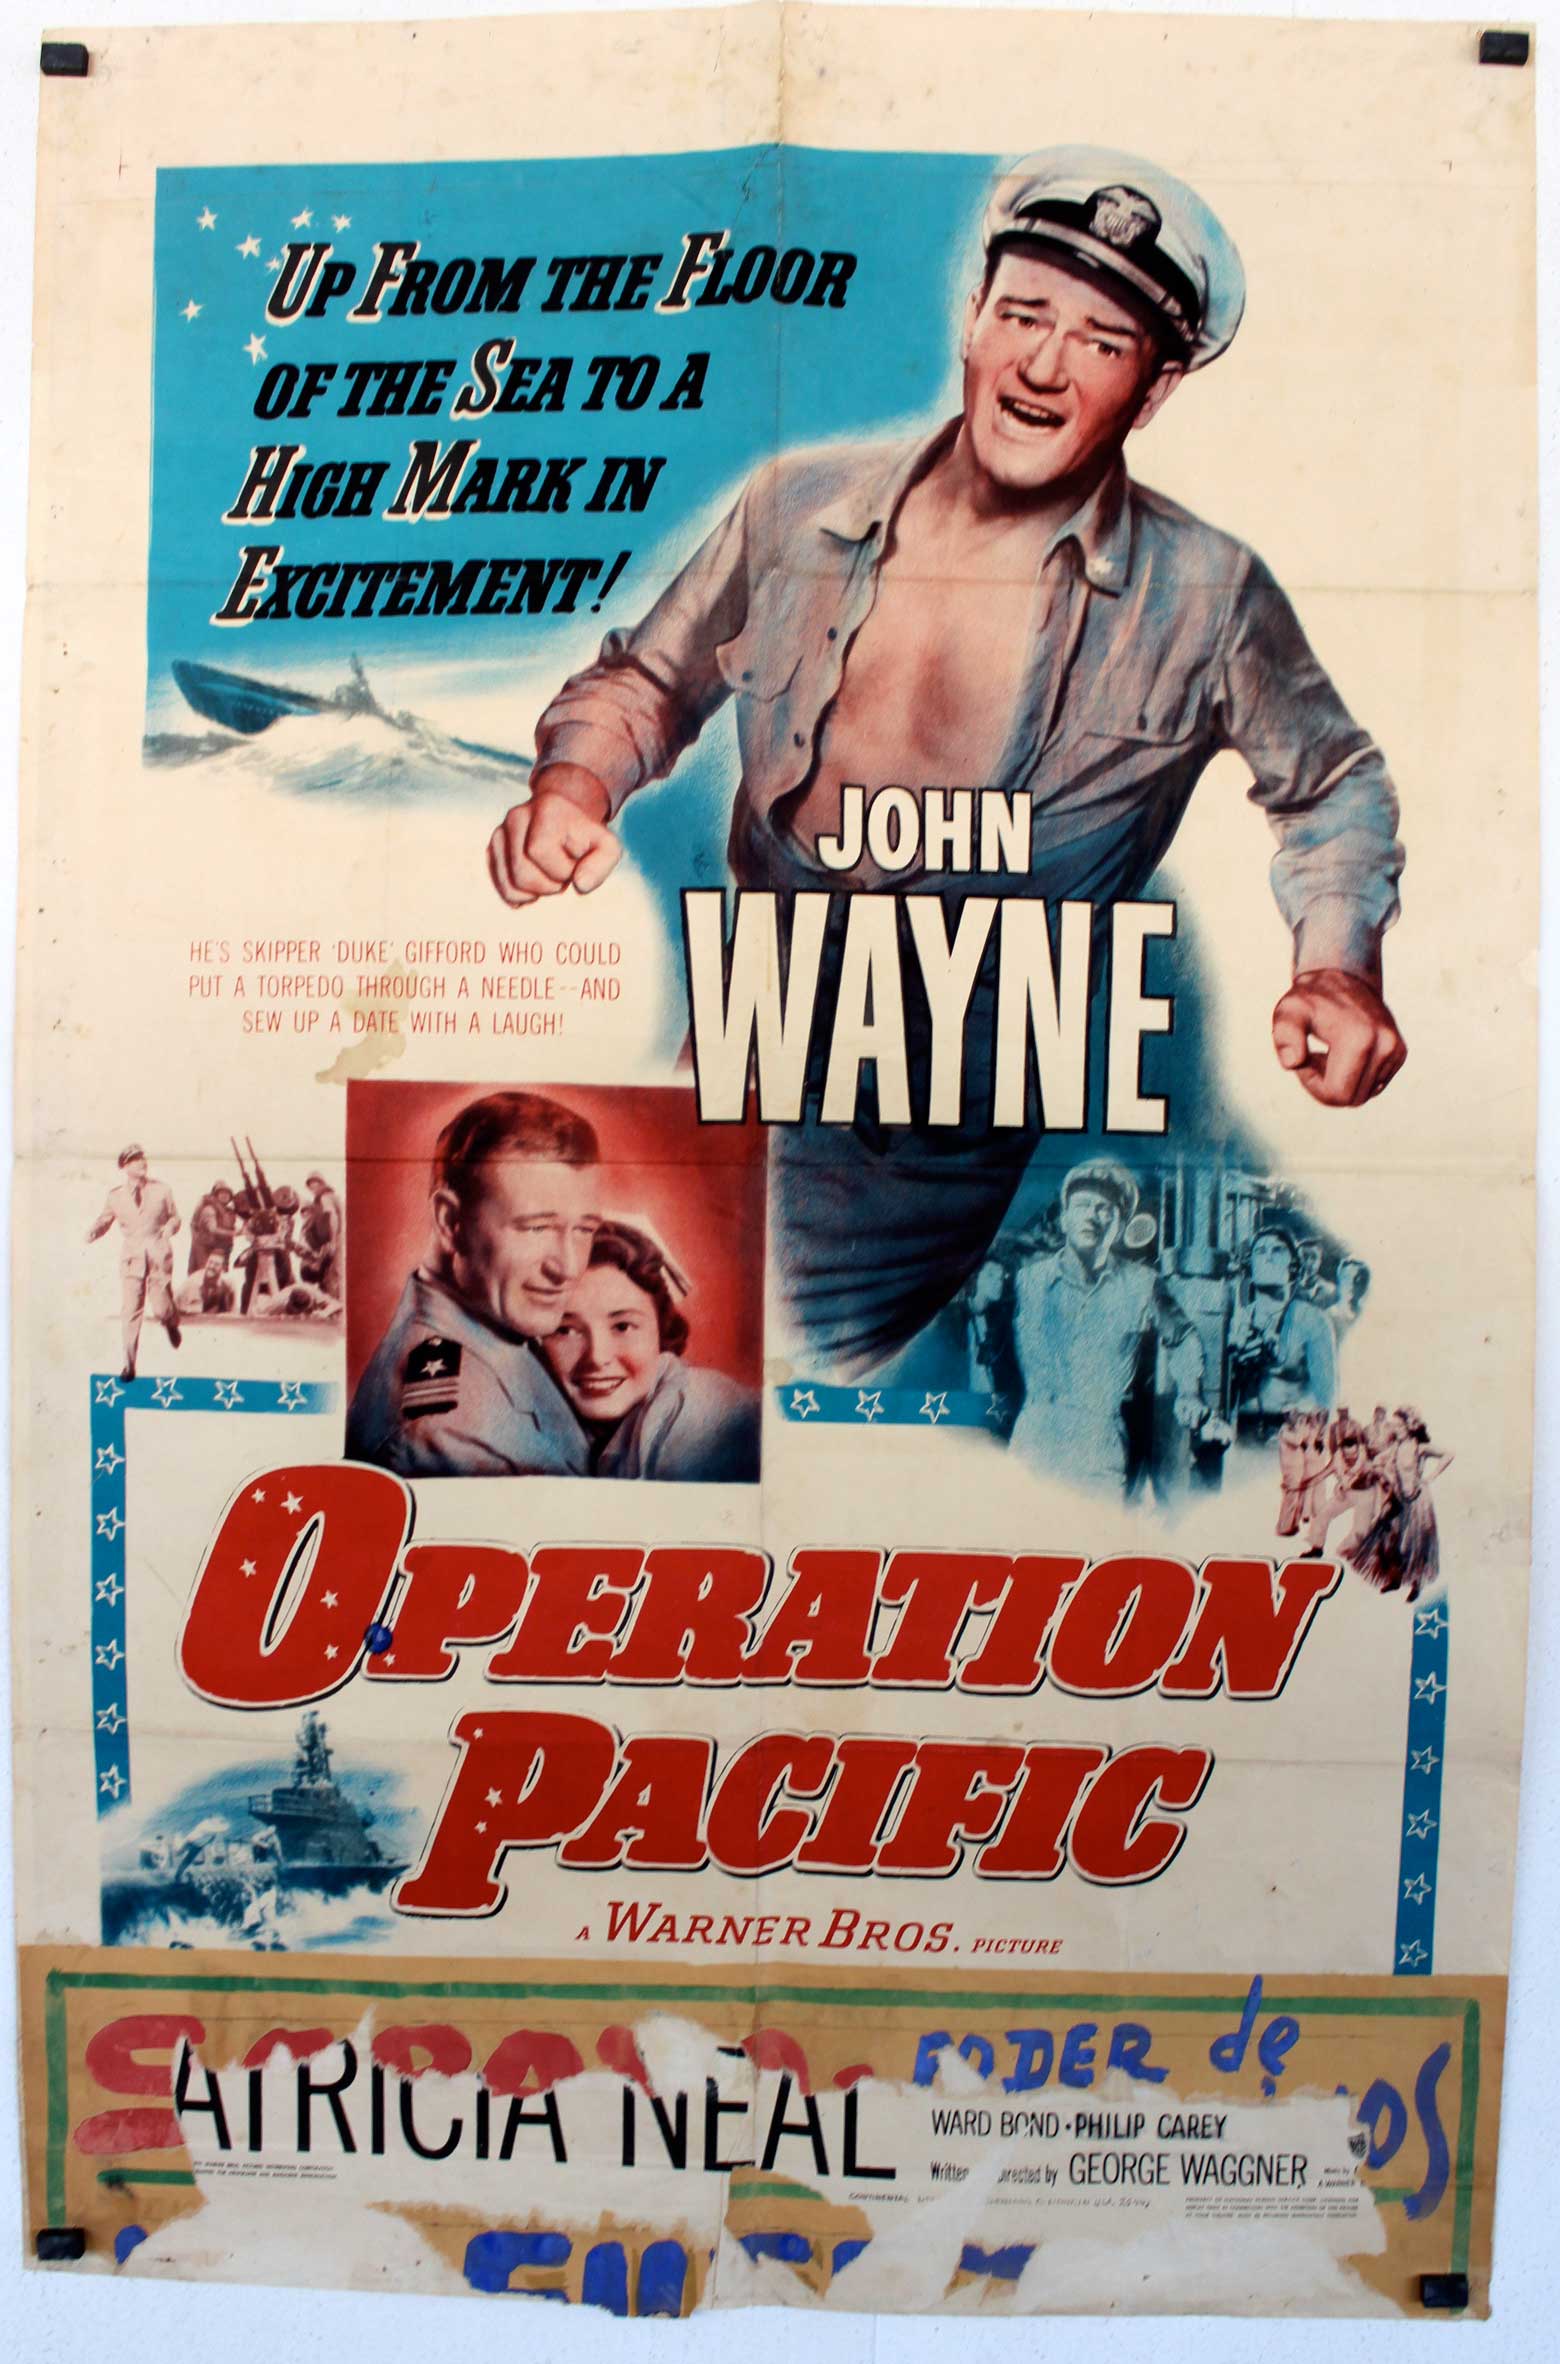 OPERATION PACIFIC